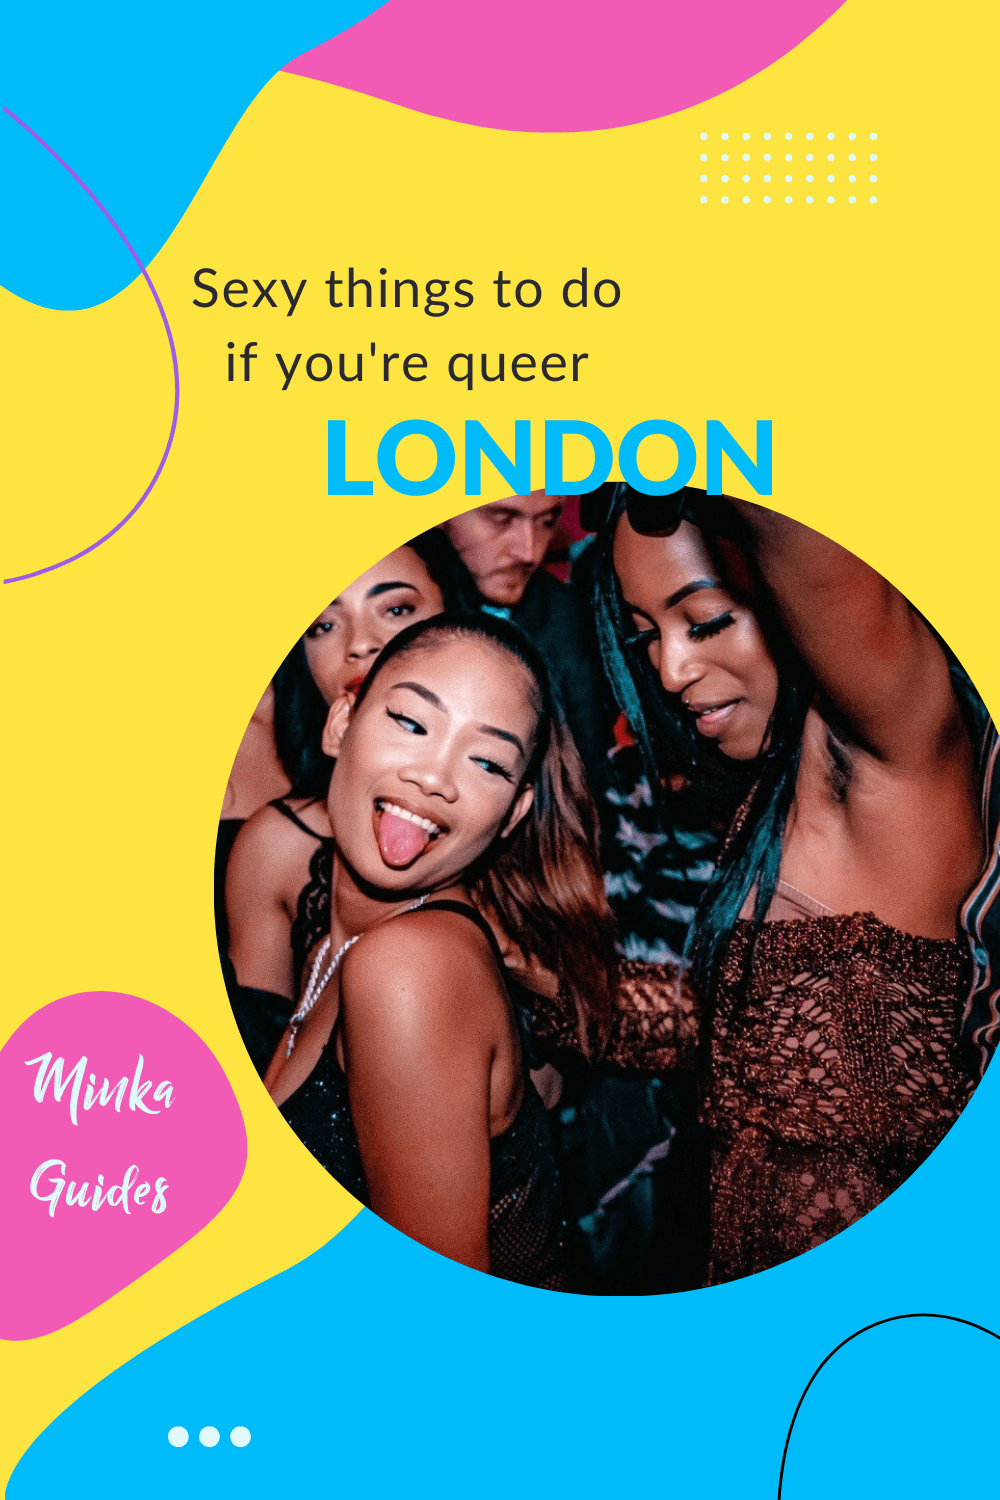 Sexy thing to do in London if you're queer | Minka Guides